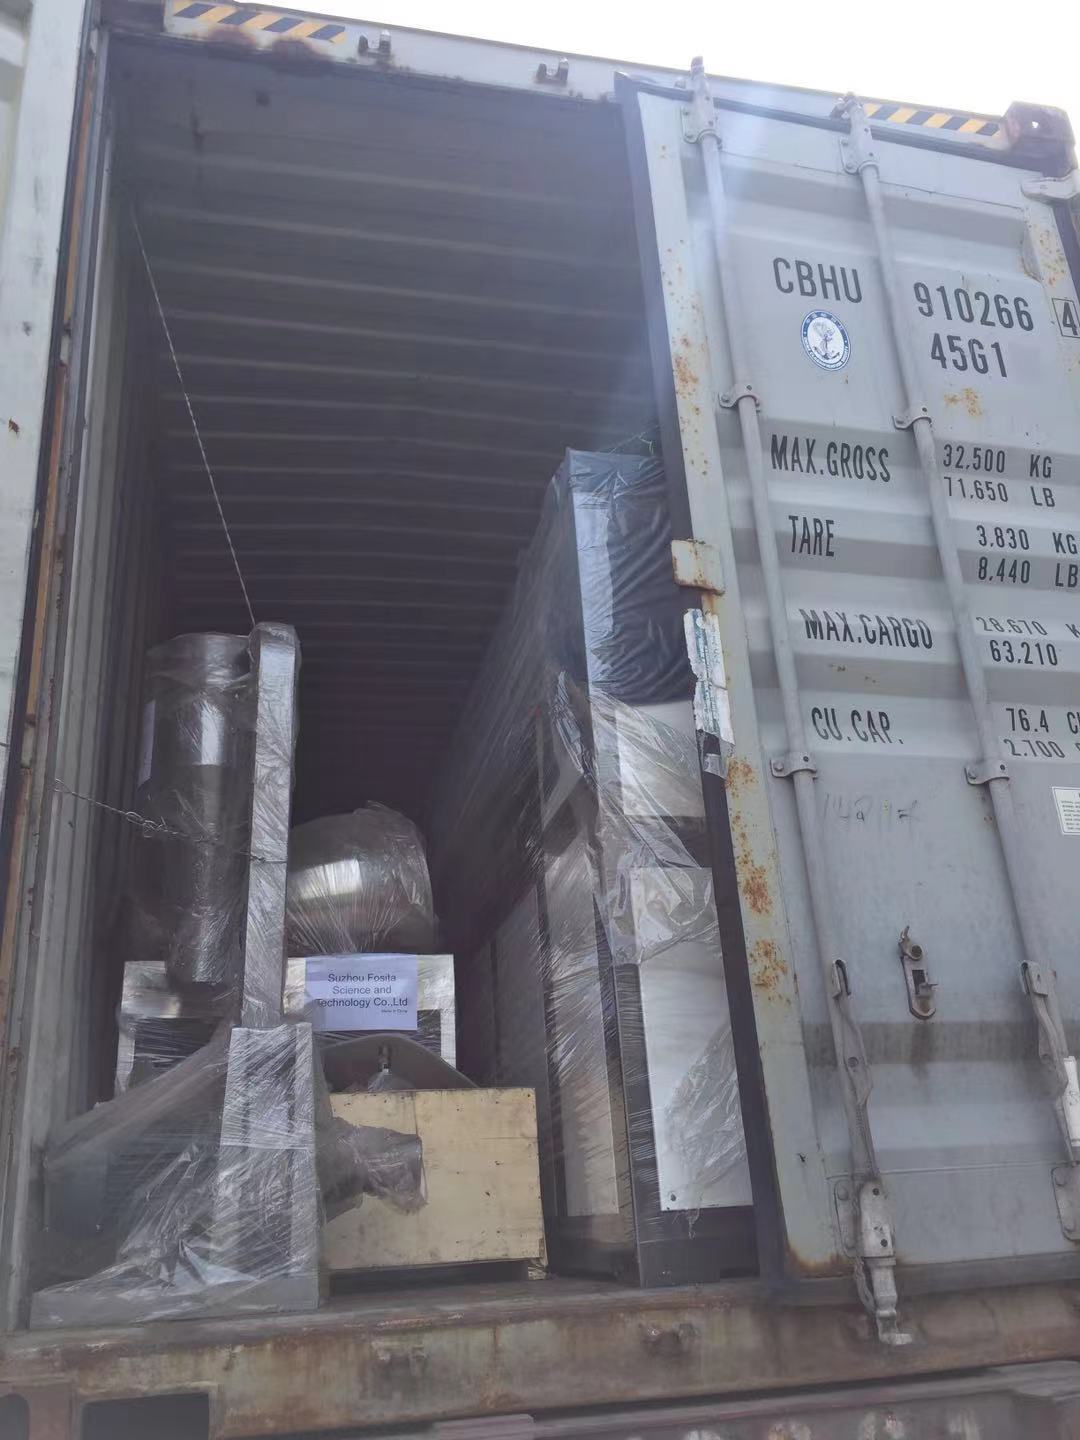 Two Containers for Plastic Pipe Machine are delivery to Saudi